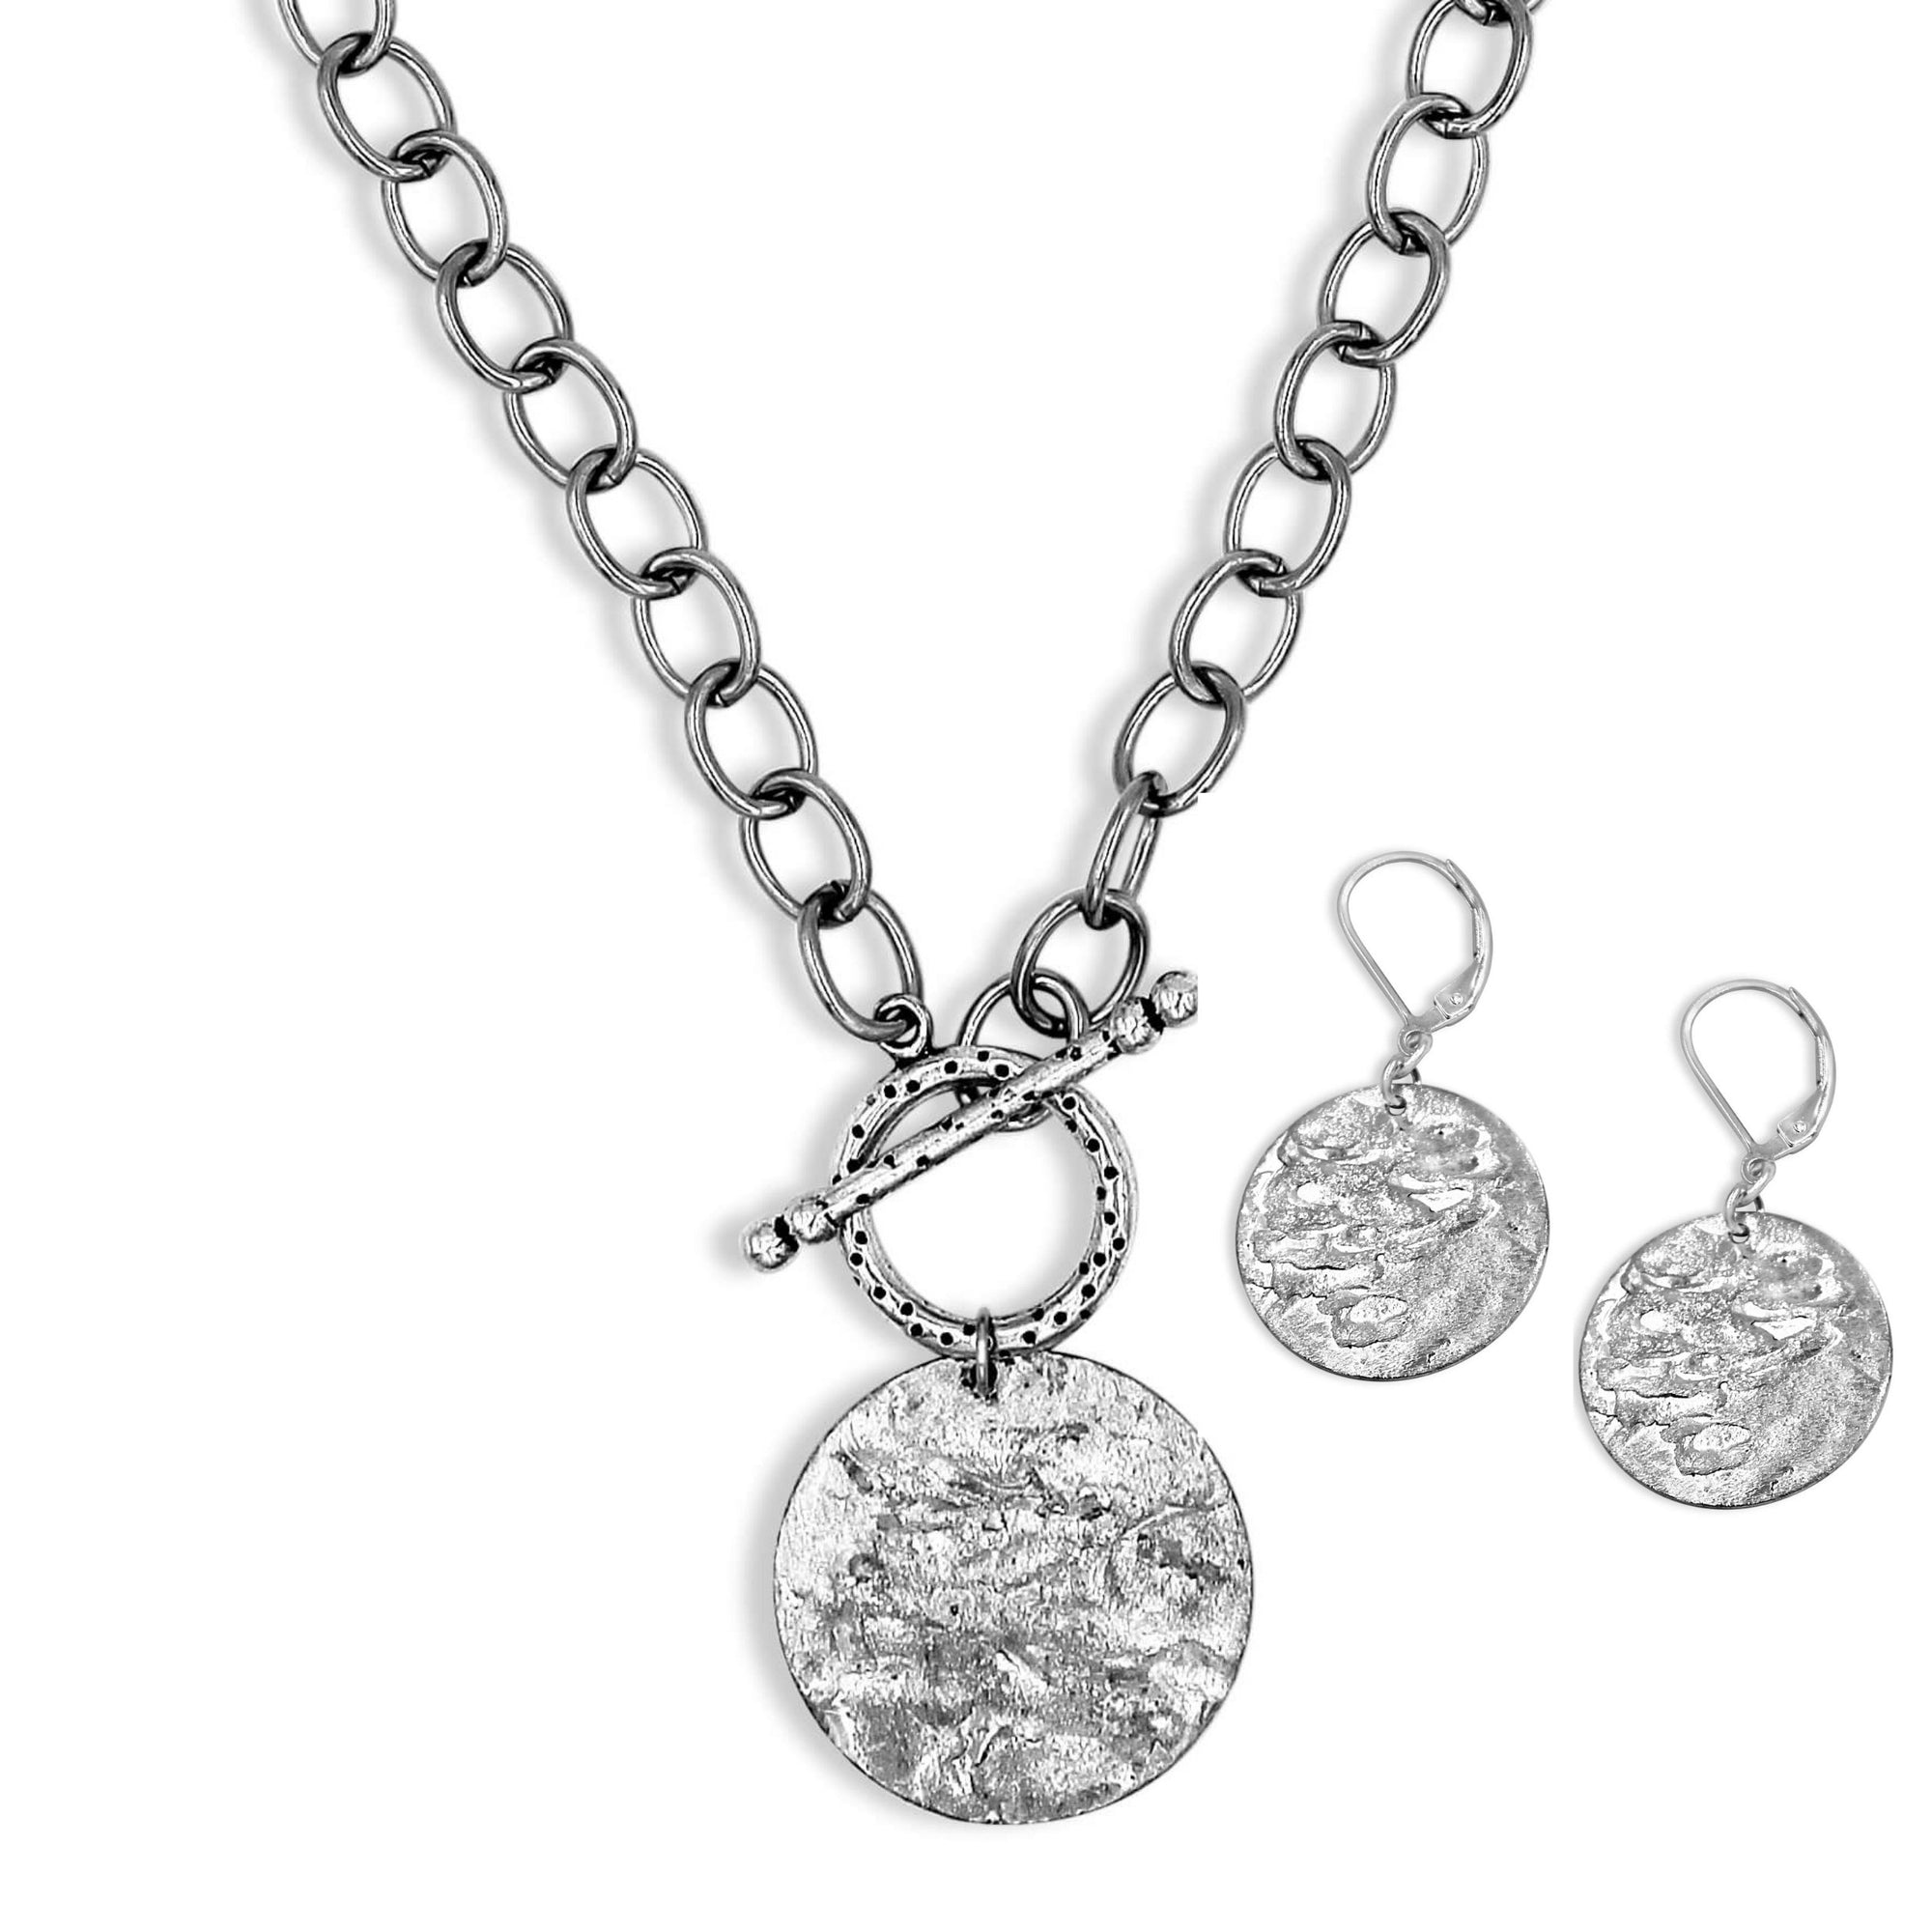 Stainless Steel Chain Bracelet with Toggle Clasp and retangle Silver Earrings with Leverback Earrings. These are part of my Silver Lining Collection at creativejewelrybymarcia.com